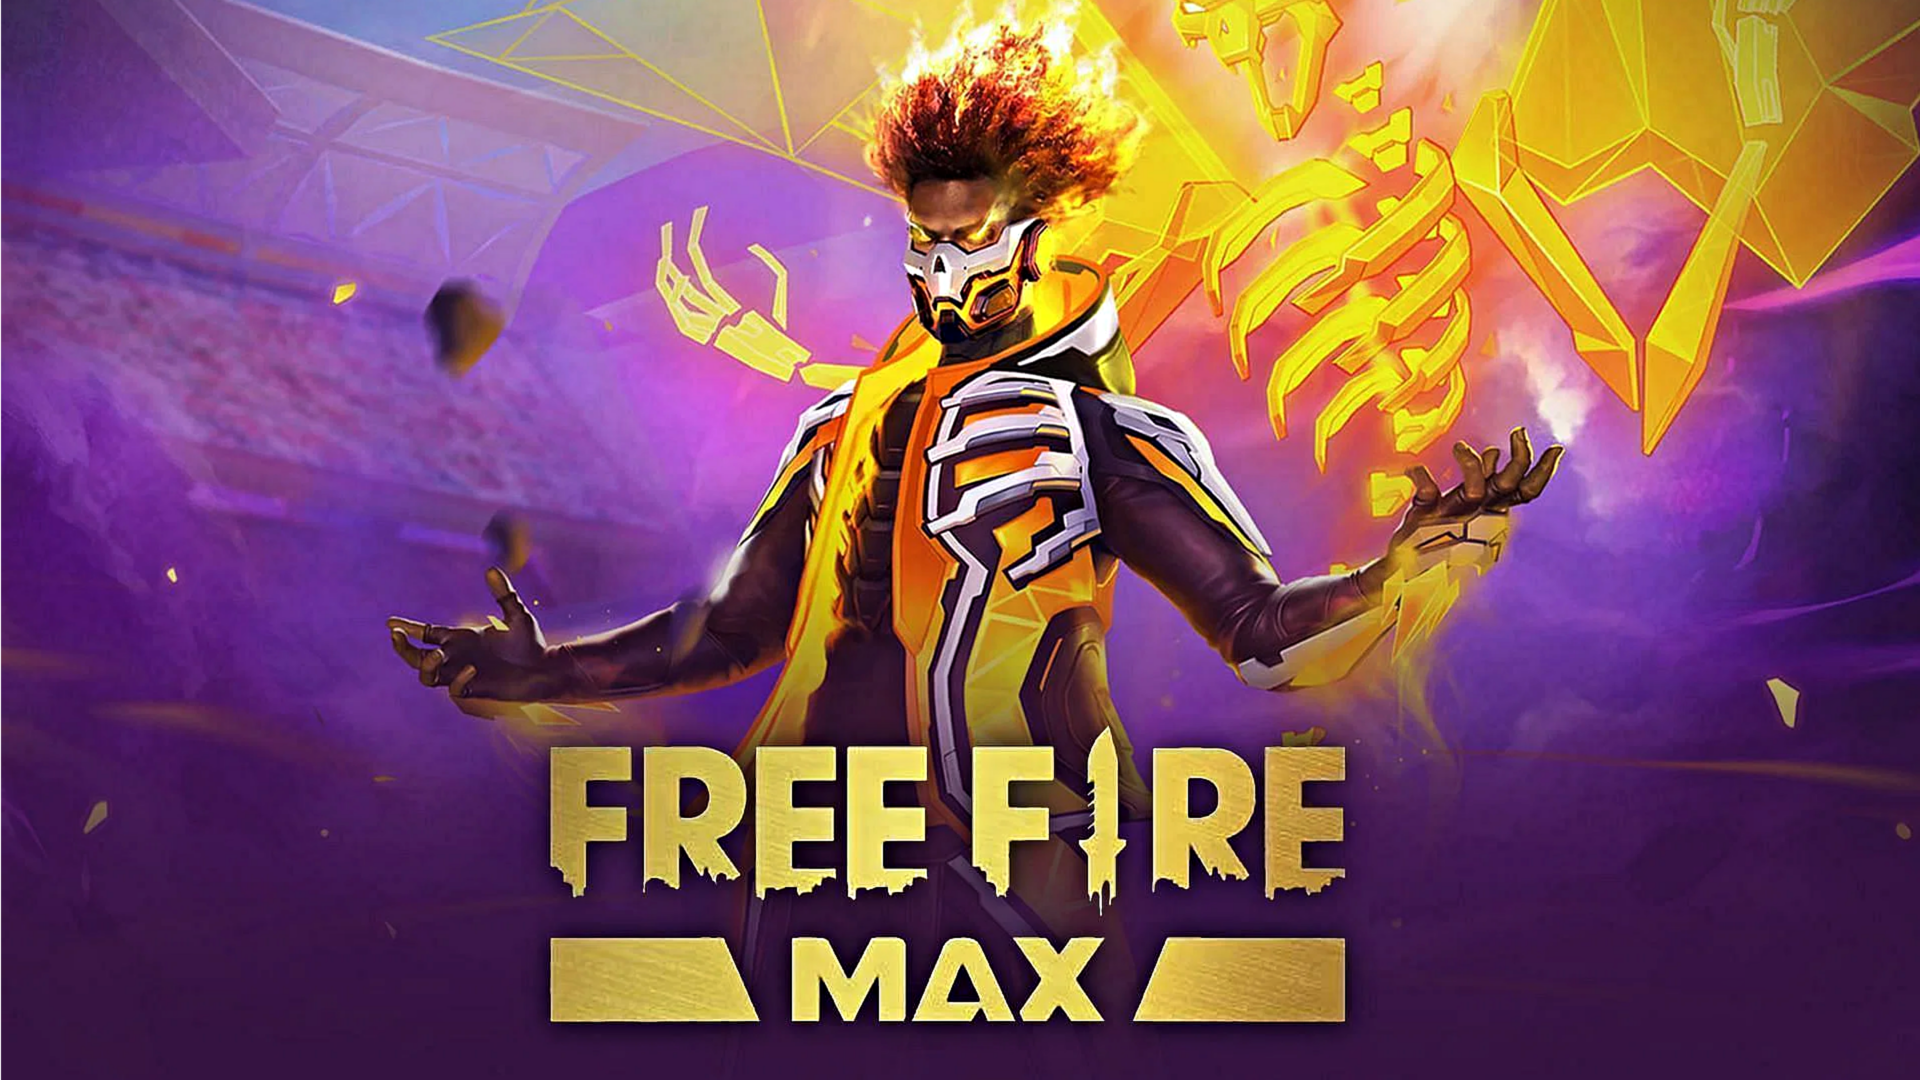 Free Fire MAX codes for May 8: How to redeem